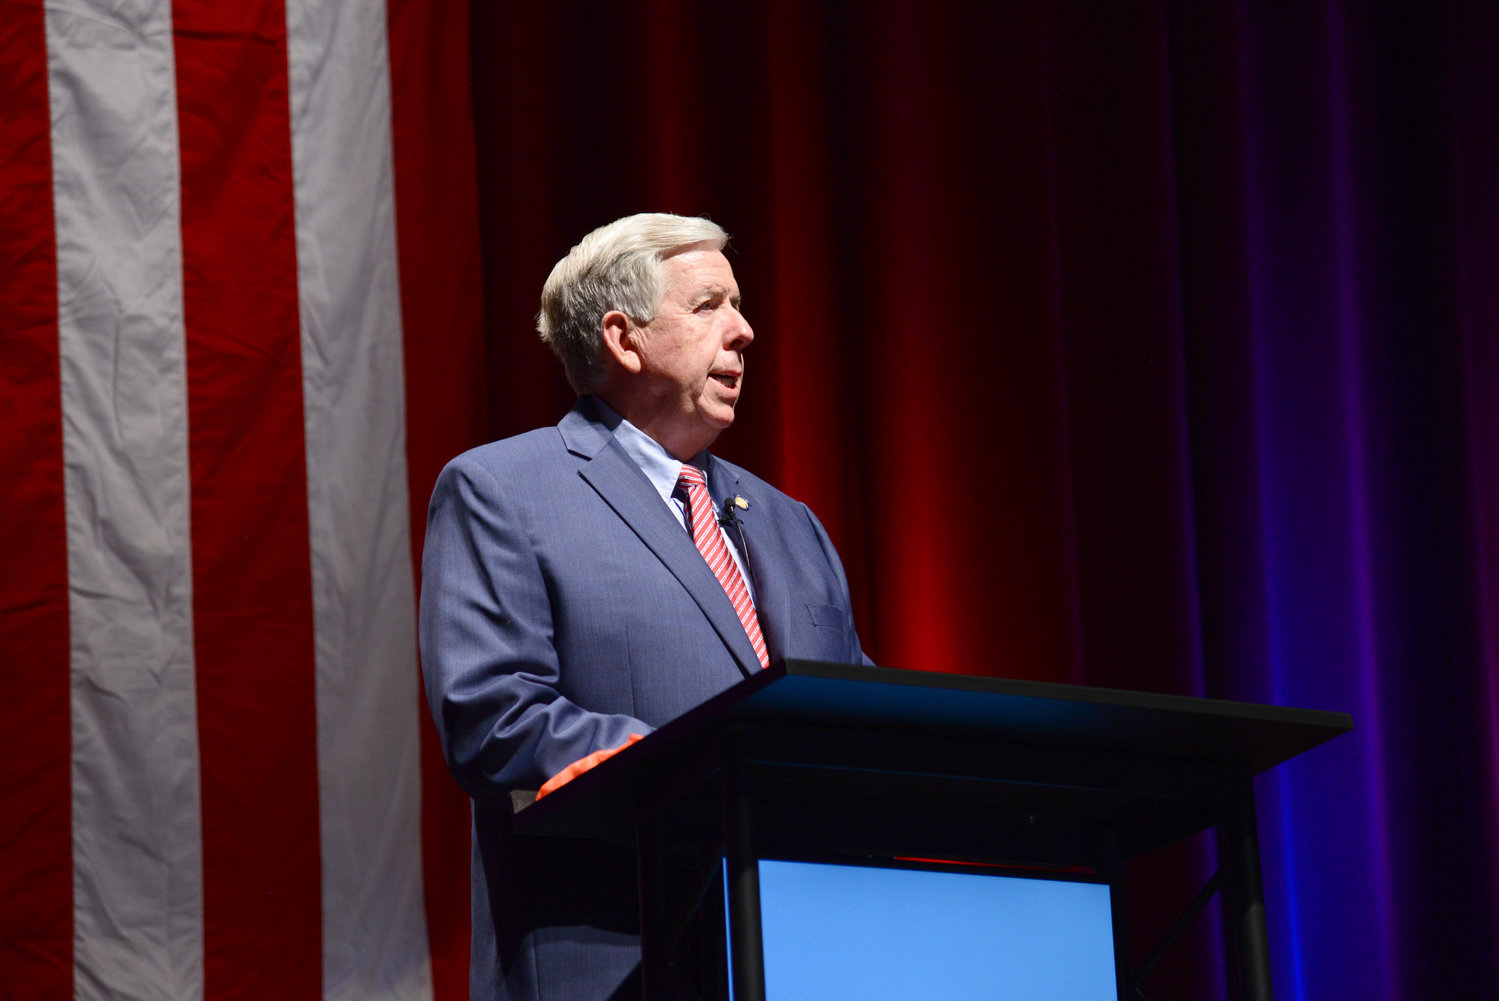 Gov. Mike Parson discusses an improved work climate in Missouri at Juanita K. Hammons Hall for the Performing Arts.